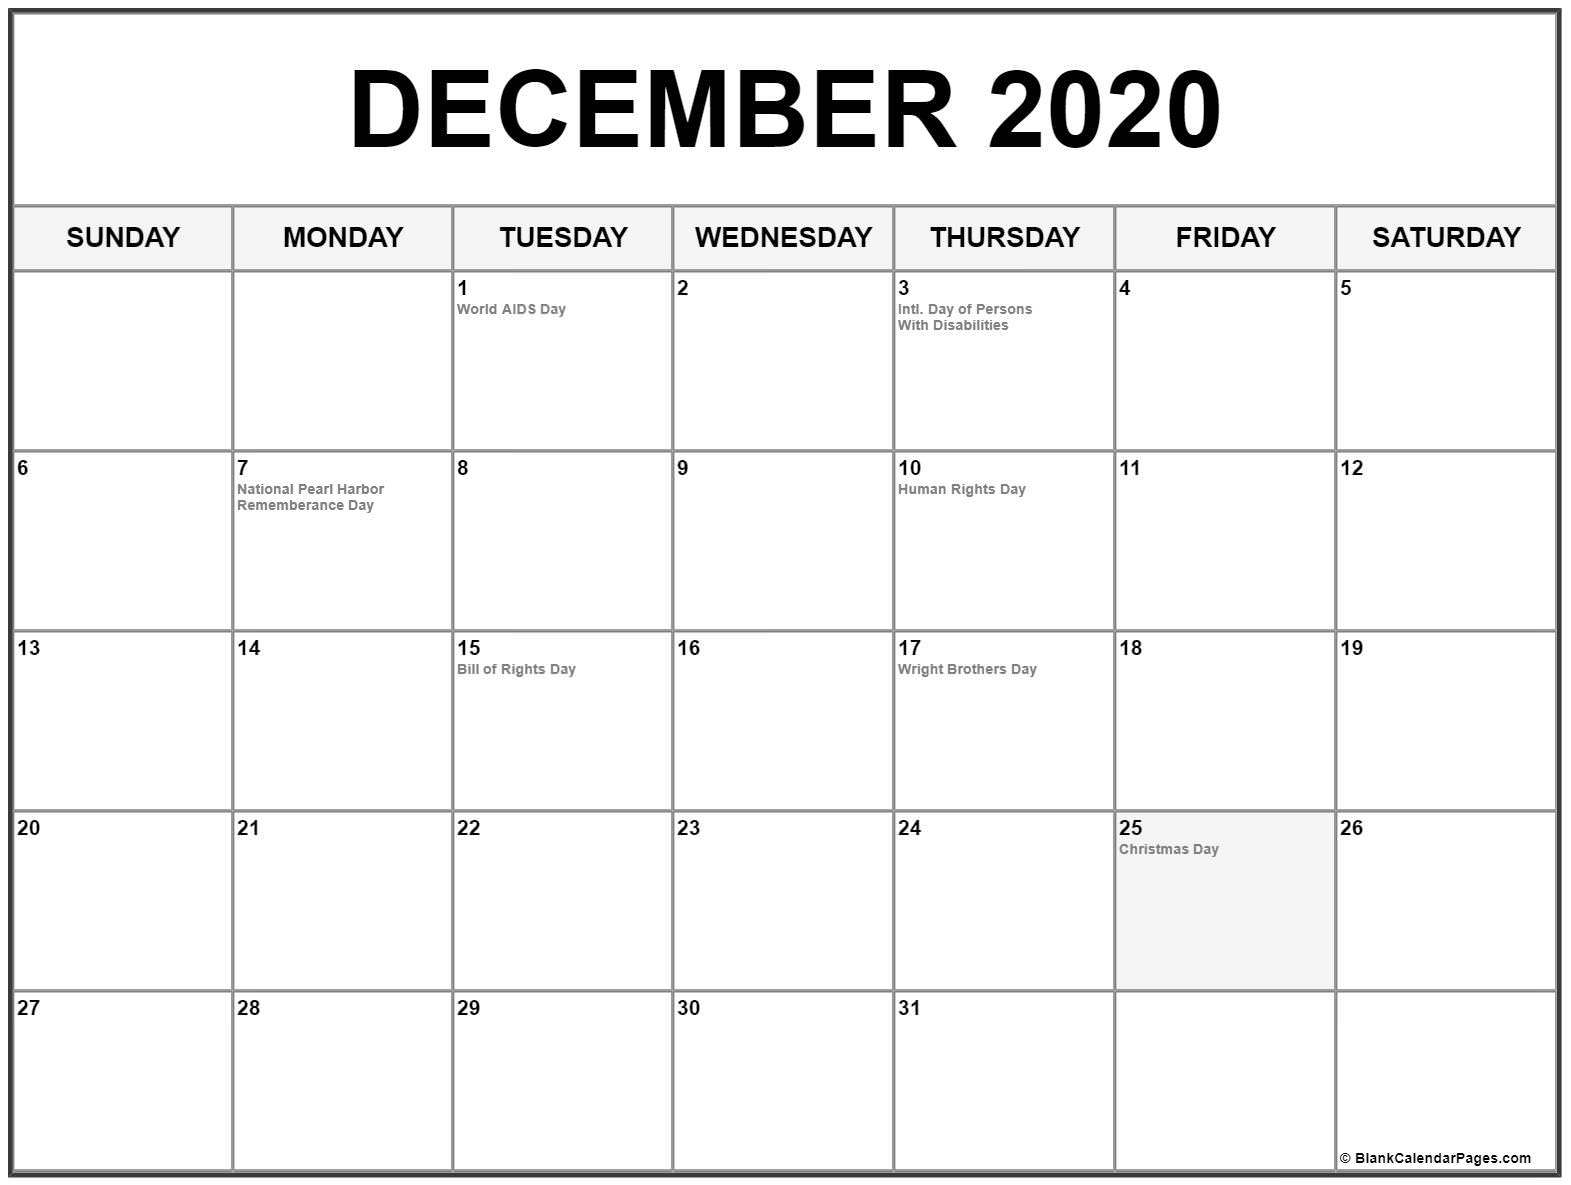 Collection Of December 2020 Calendars With Holidays Incredible December 2020 Calendar Boxing Day